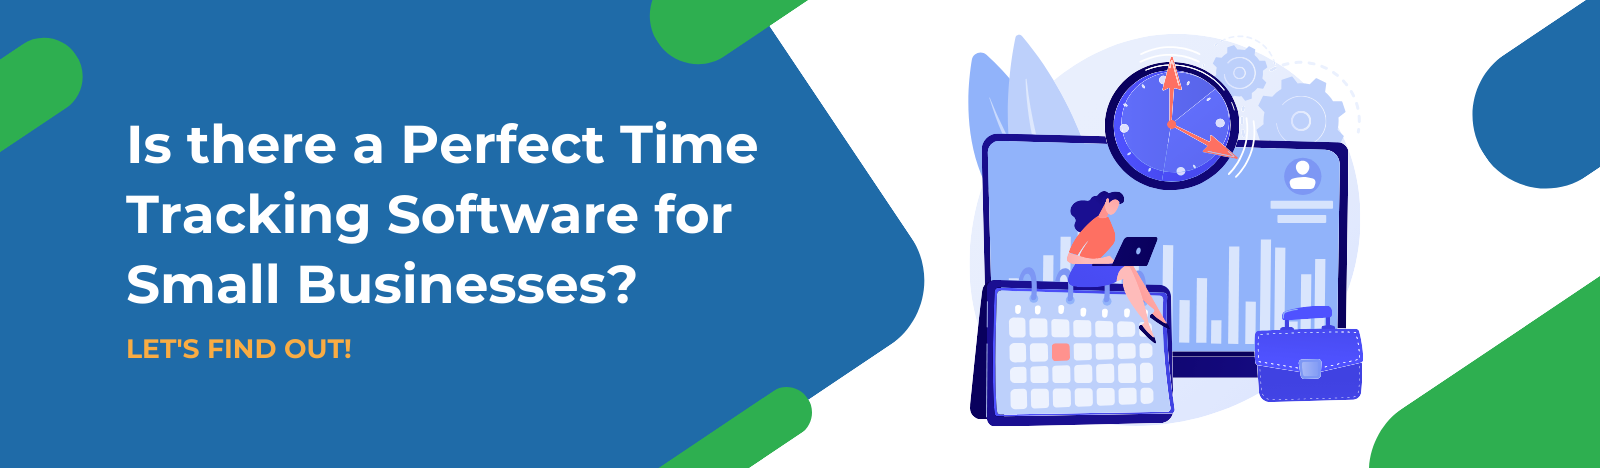 Perfect Time Tracking Software for Small Business